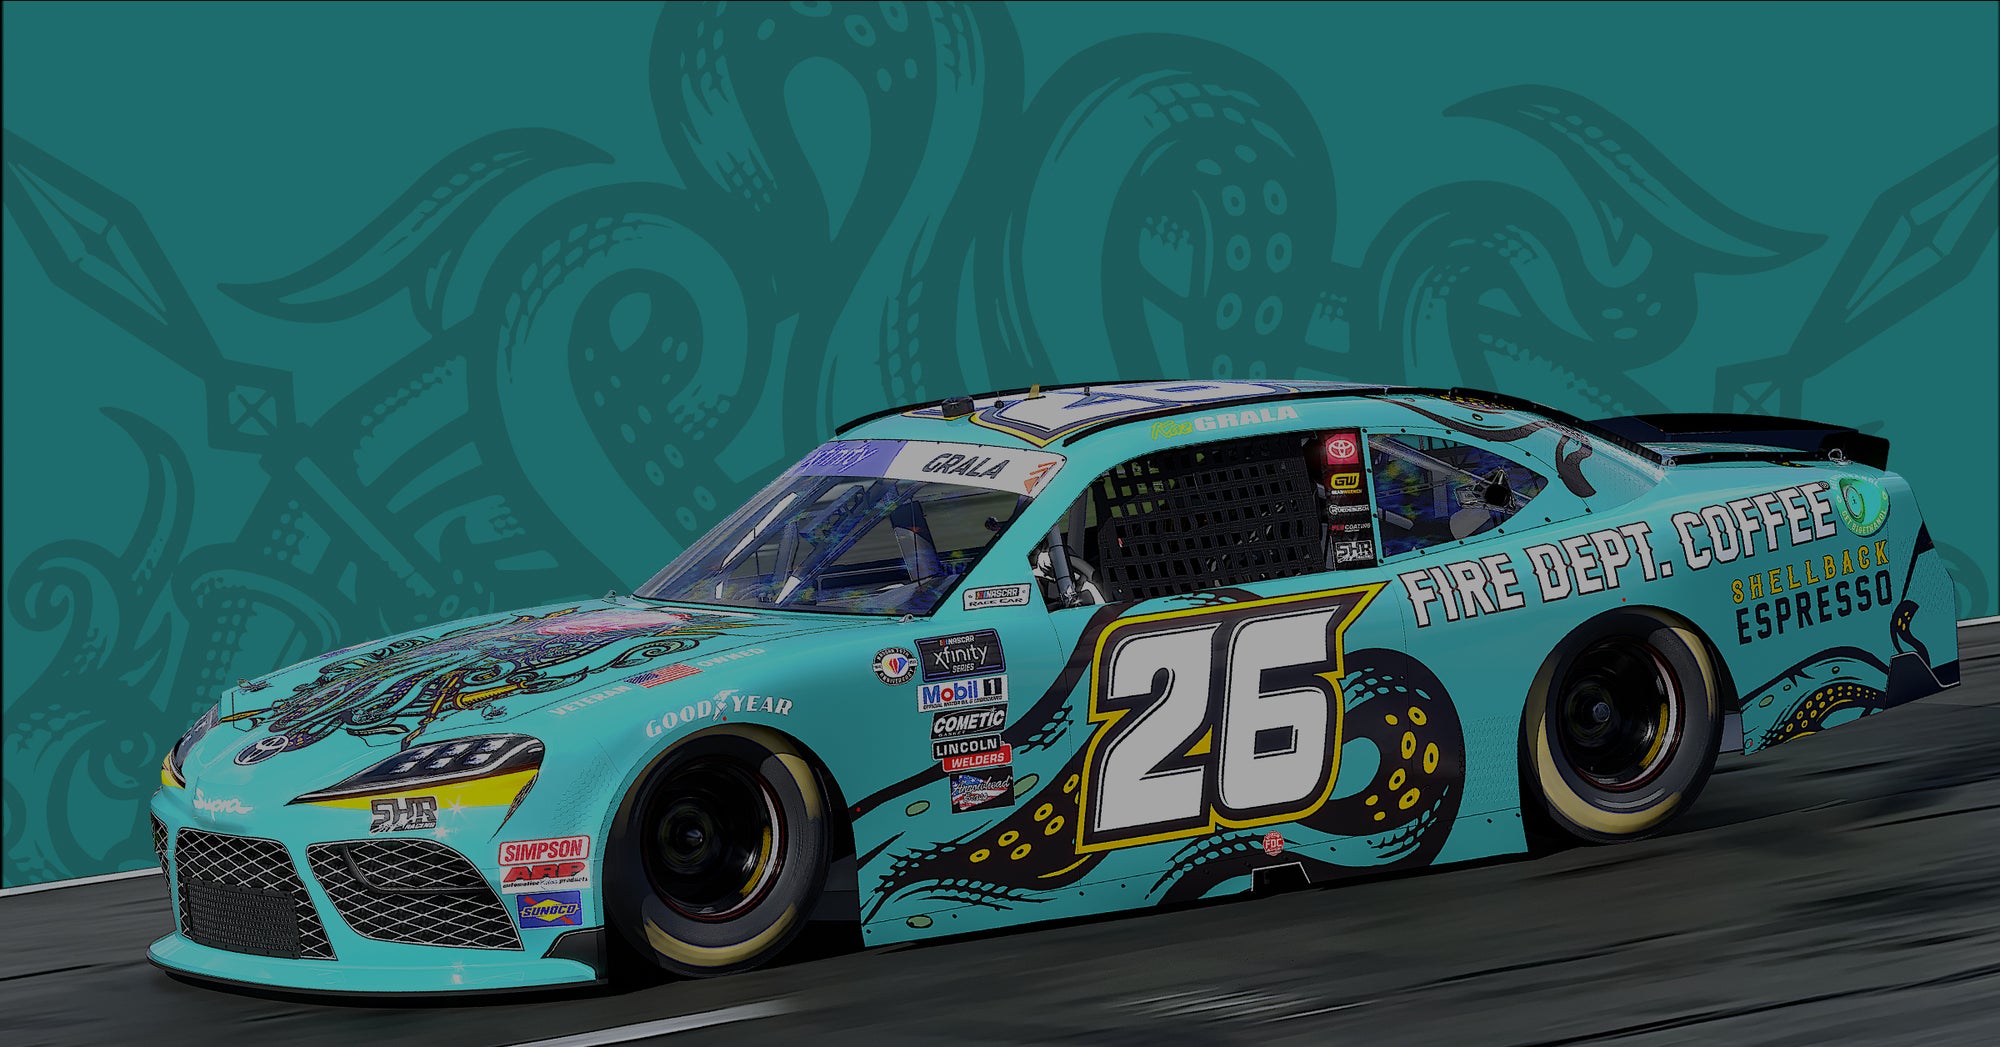 Shellback Espresso themed NASCAR scheme in teal blue with the number 26 on the side.